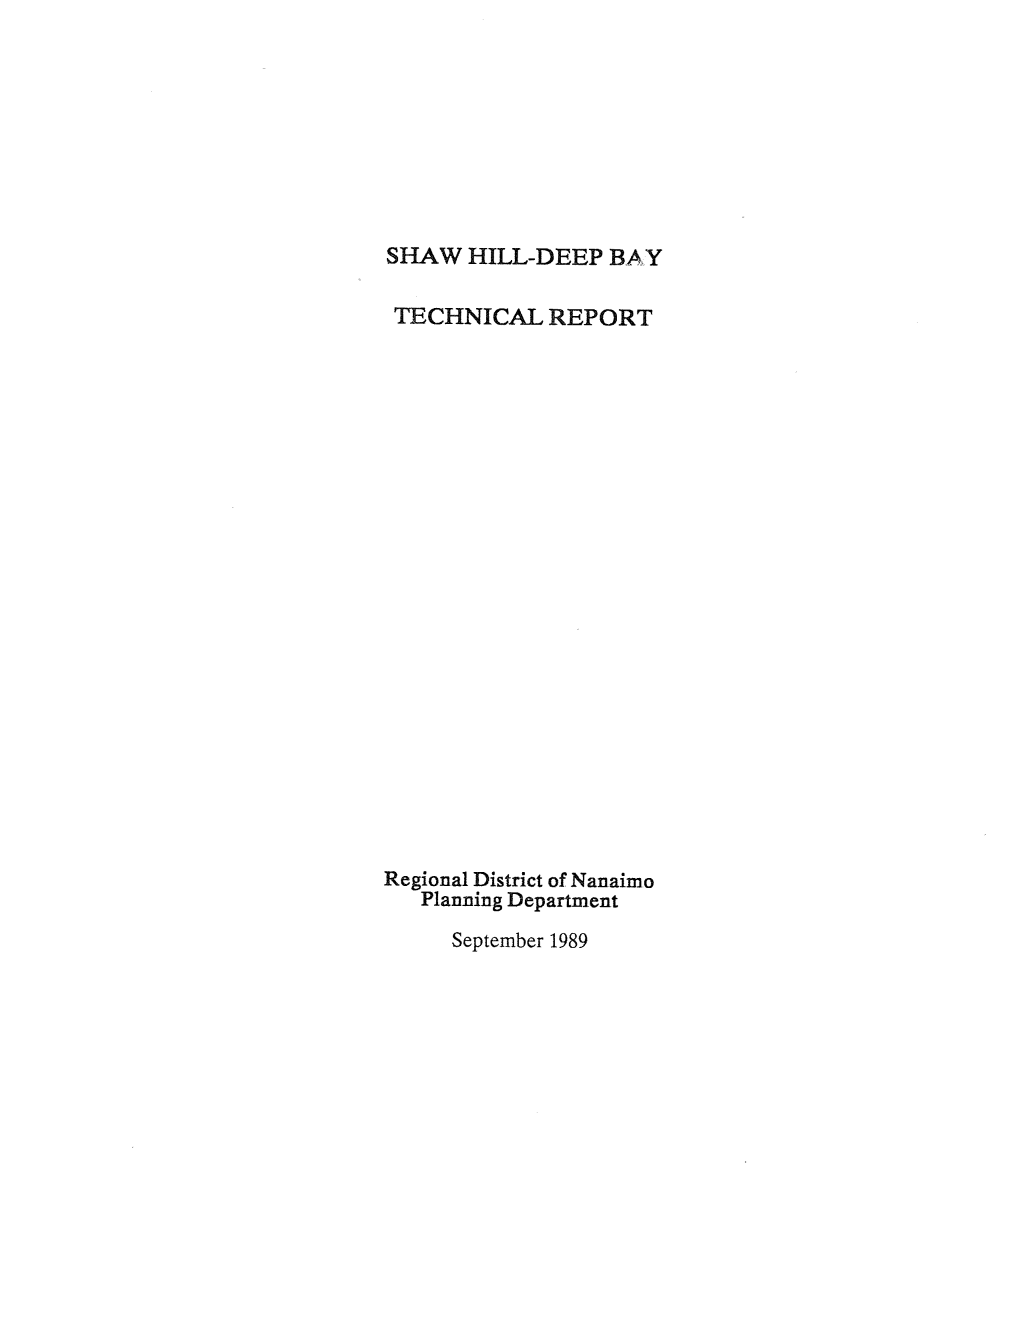 Shaw Hill-Deep Bay Technical Report Page 20